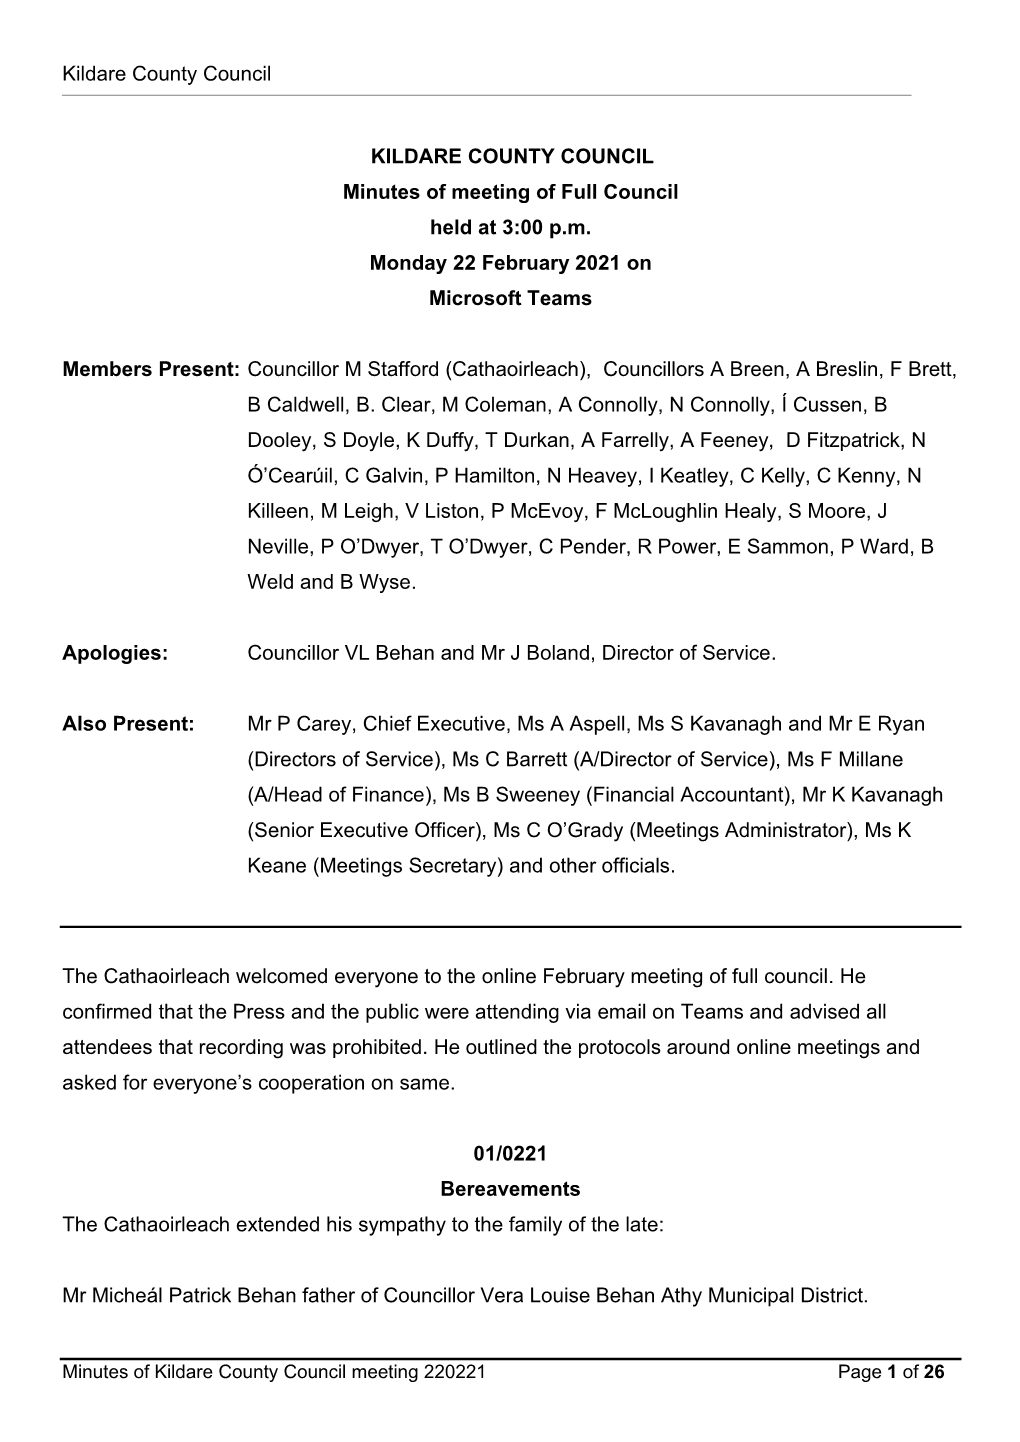 Minutes for Kildare County Council Meeting 22 February 2021